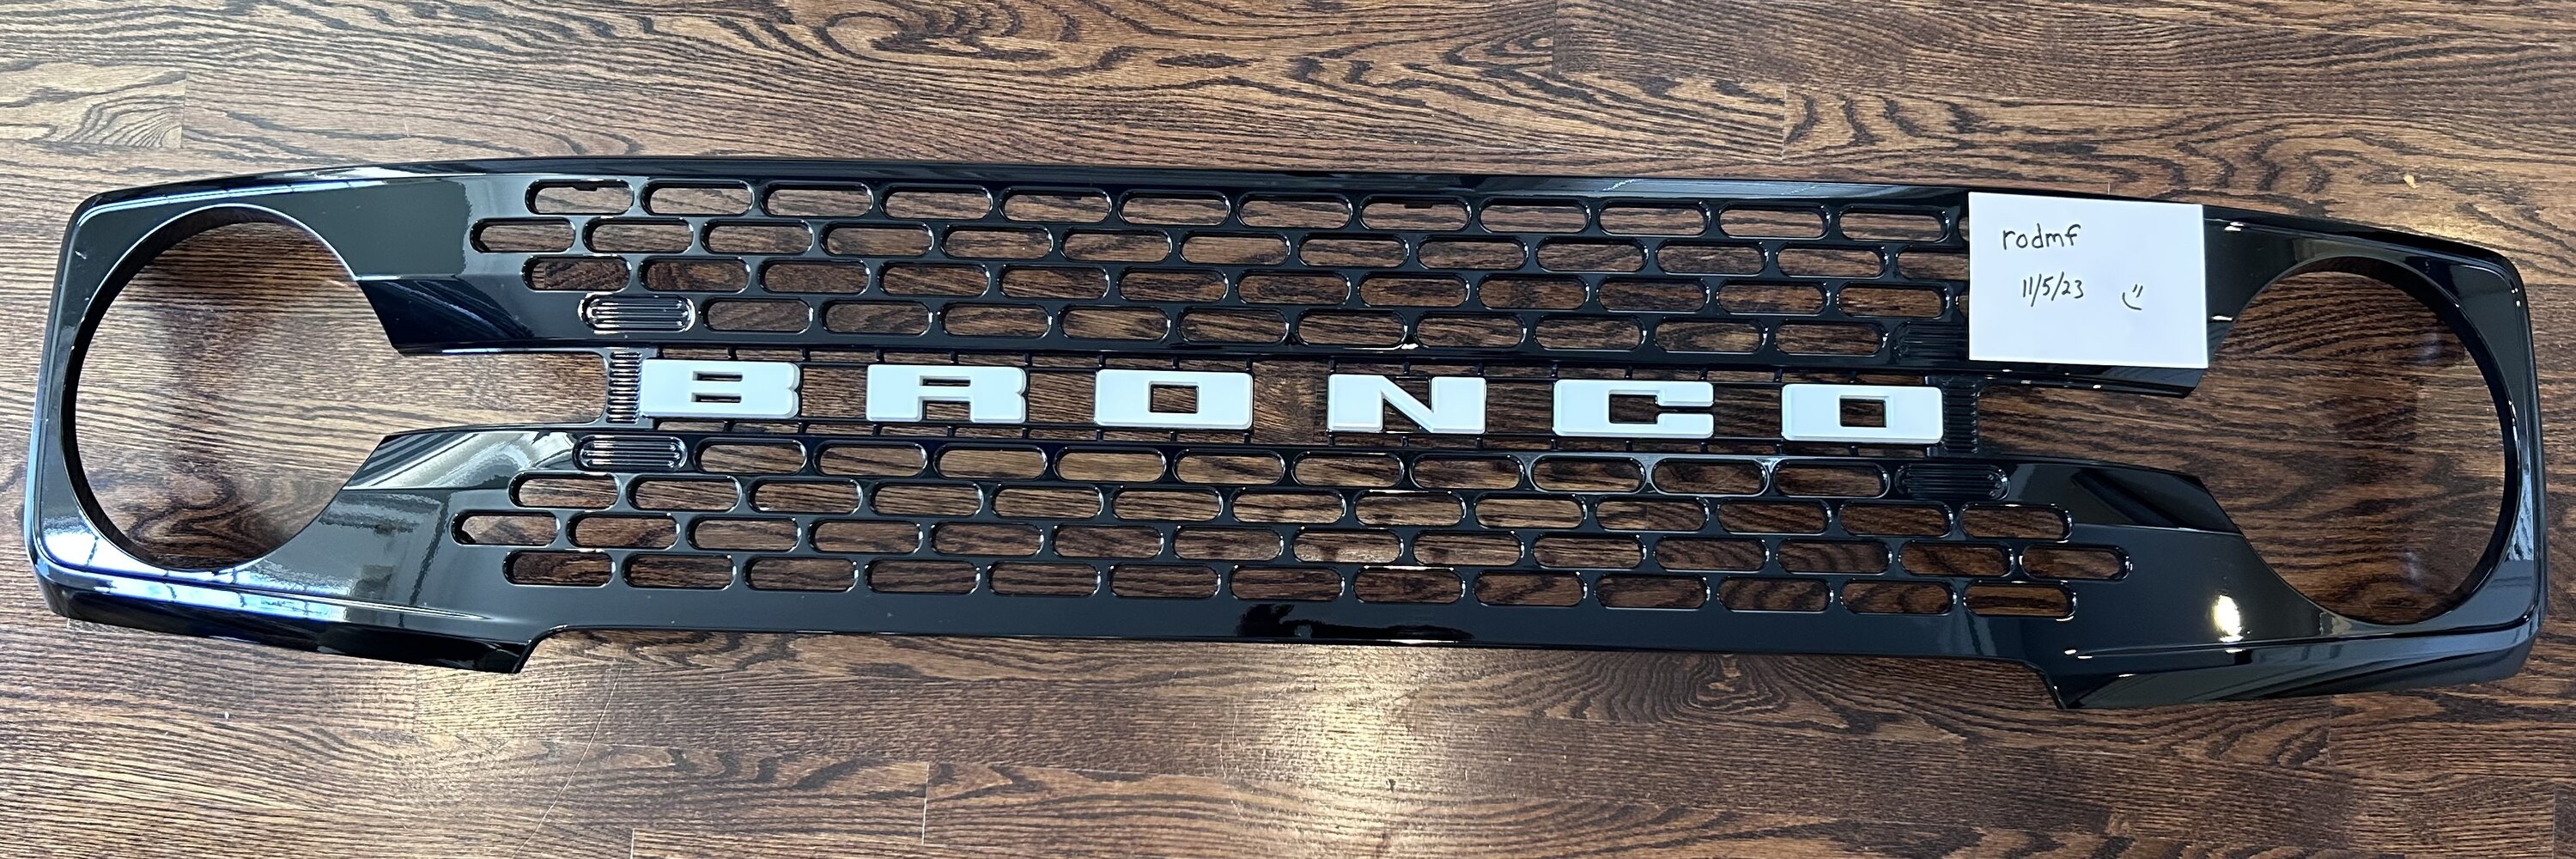 Ford Bronco Wildtrak Grille WTS ship or pick up IMG_4165